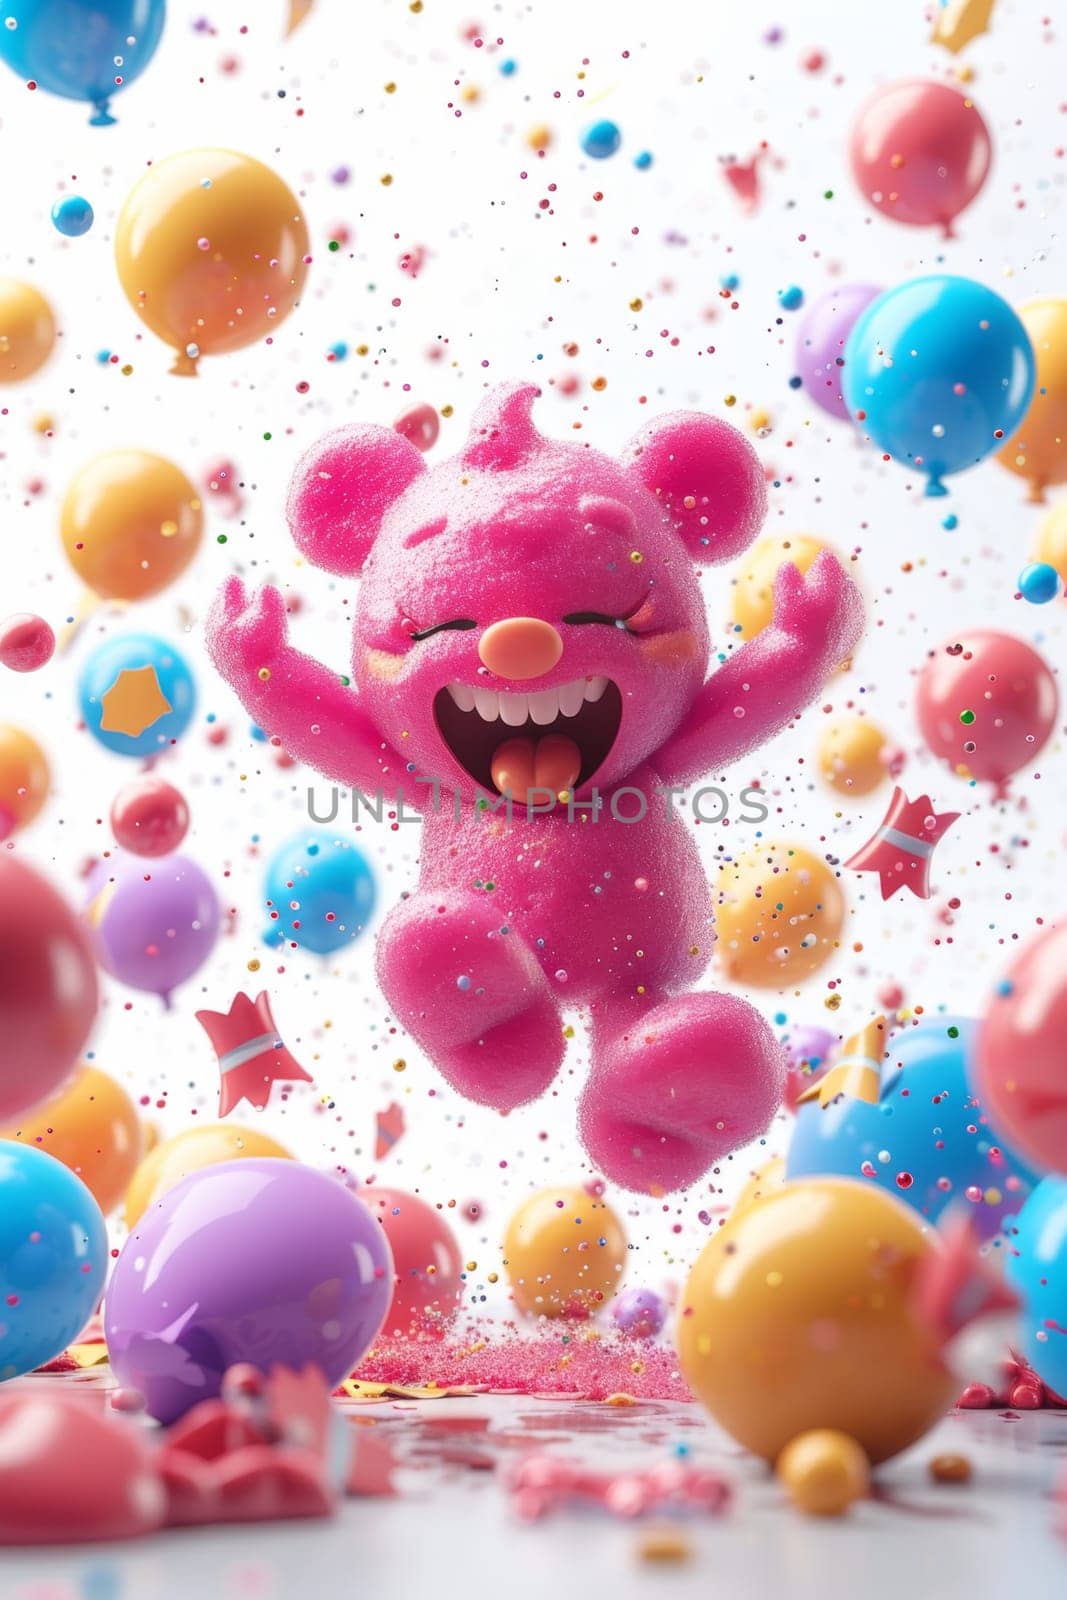 A cheerful cartoon pink character is having fun on the background of festive balloons. The concept of the holiday. 3d illustration.